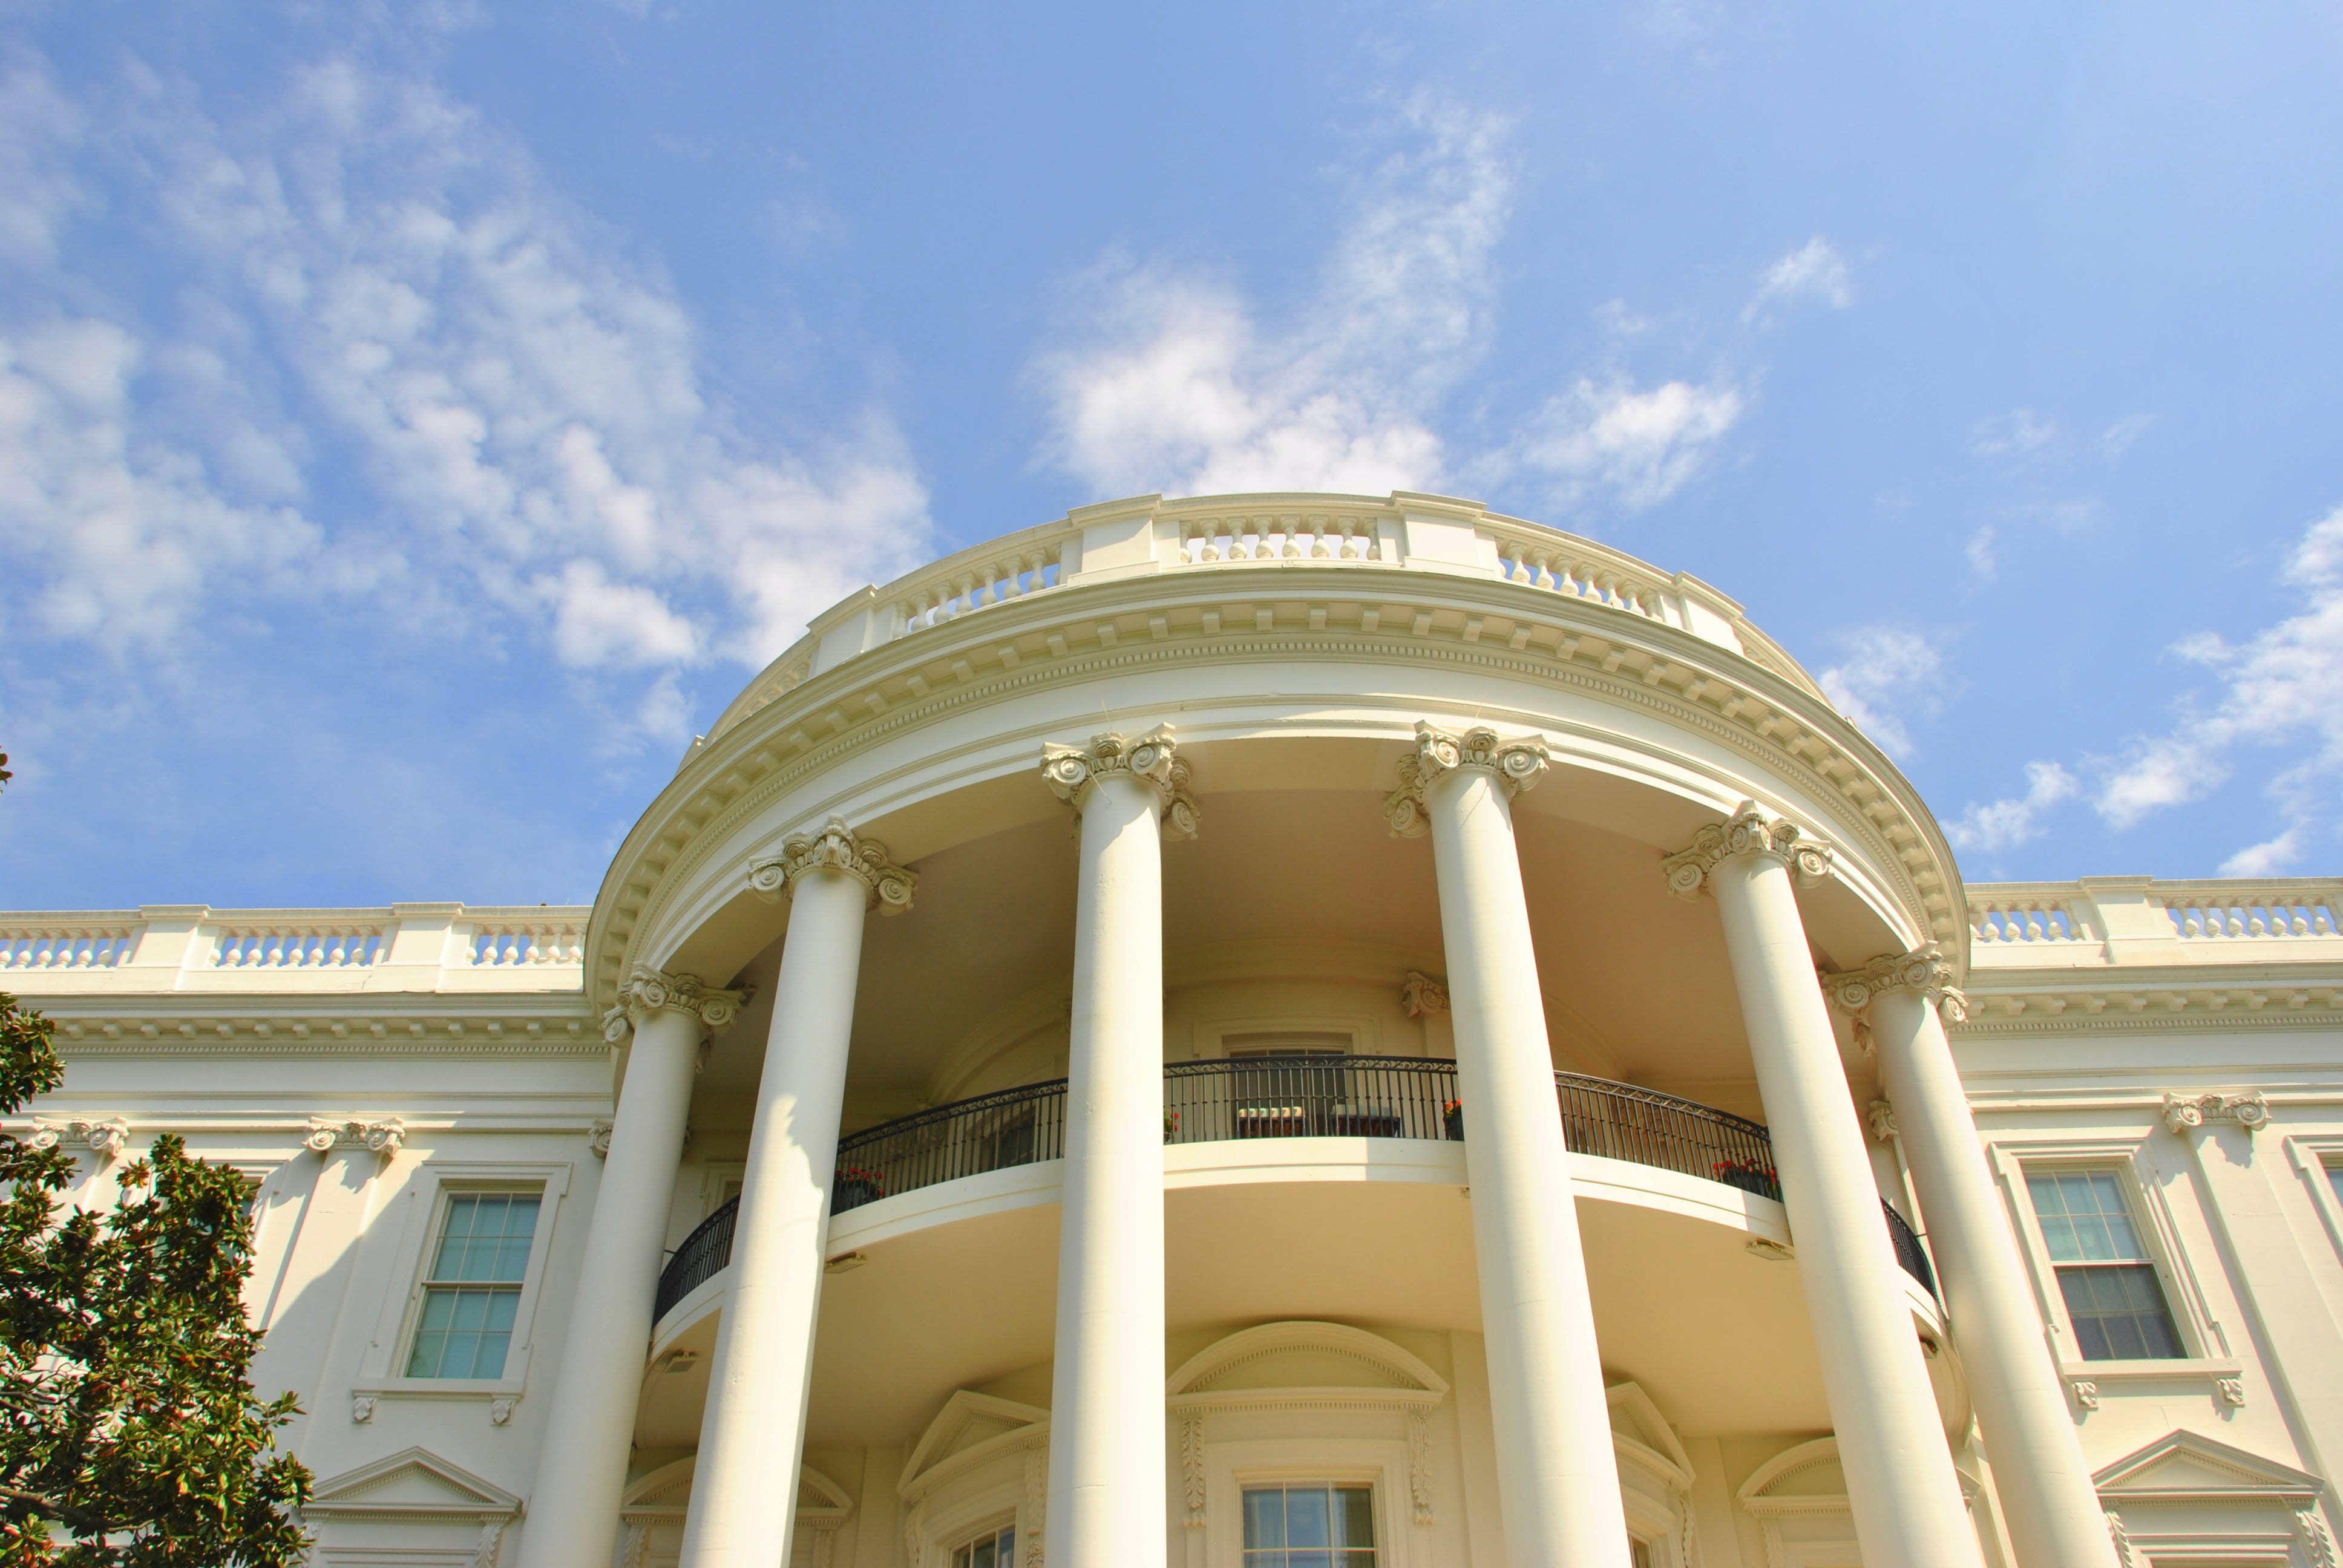 Photo of the White House from a low perspective.